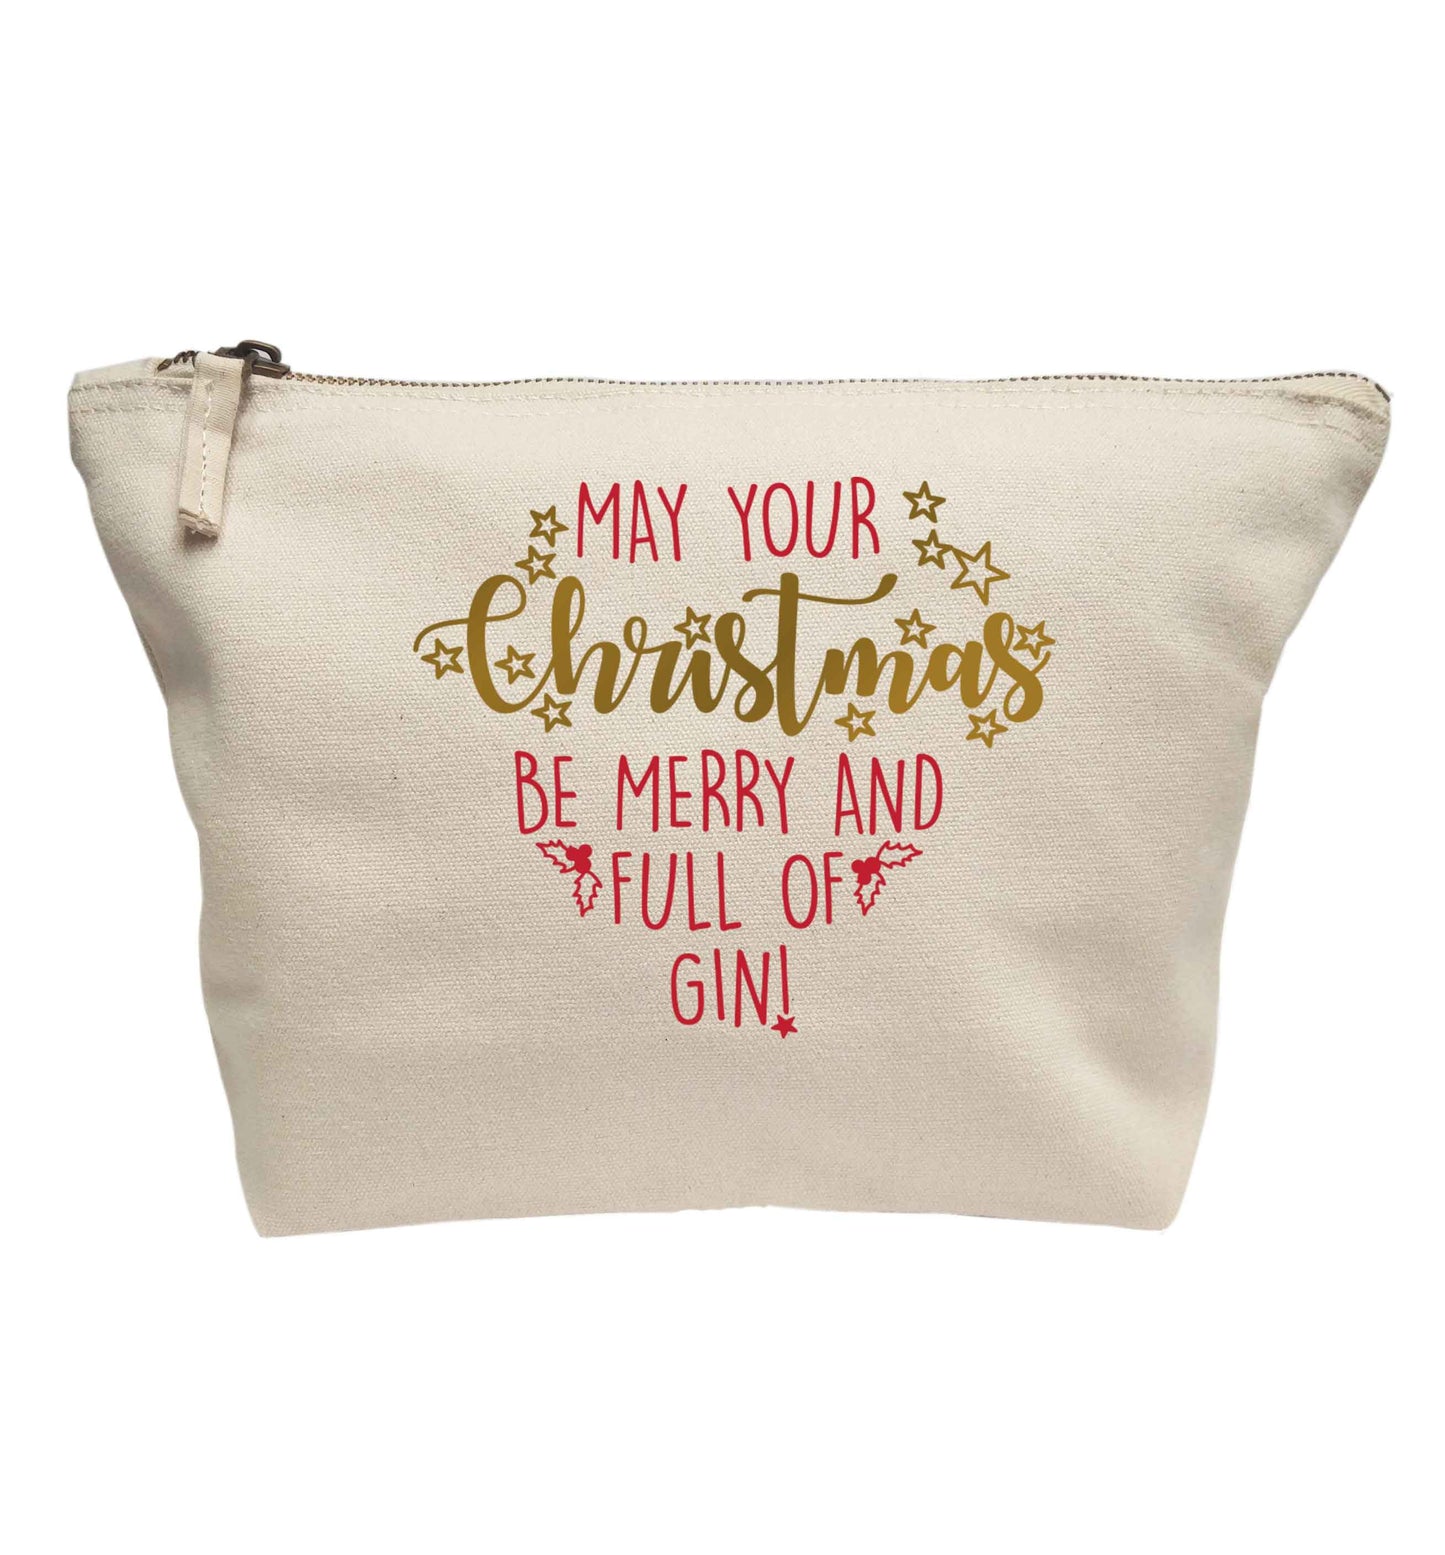 May your Christmas be merry and full of gin | makeup / wash bag